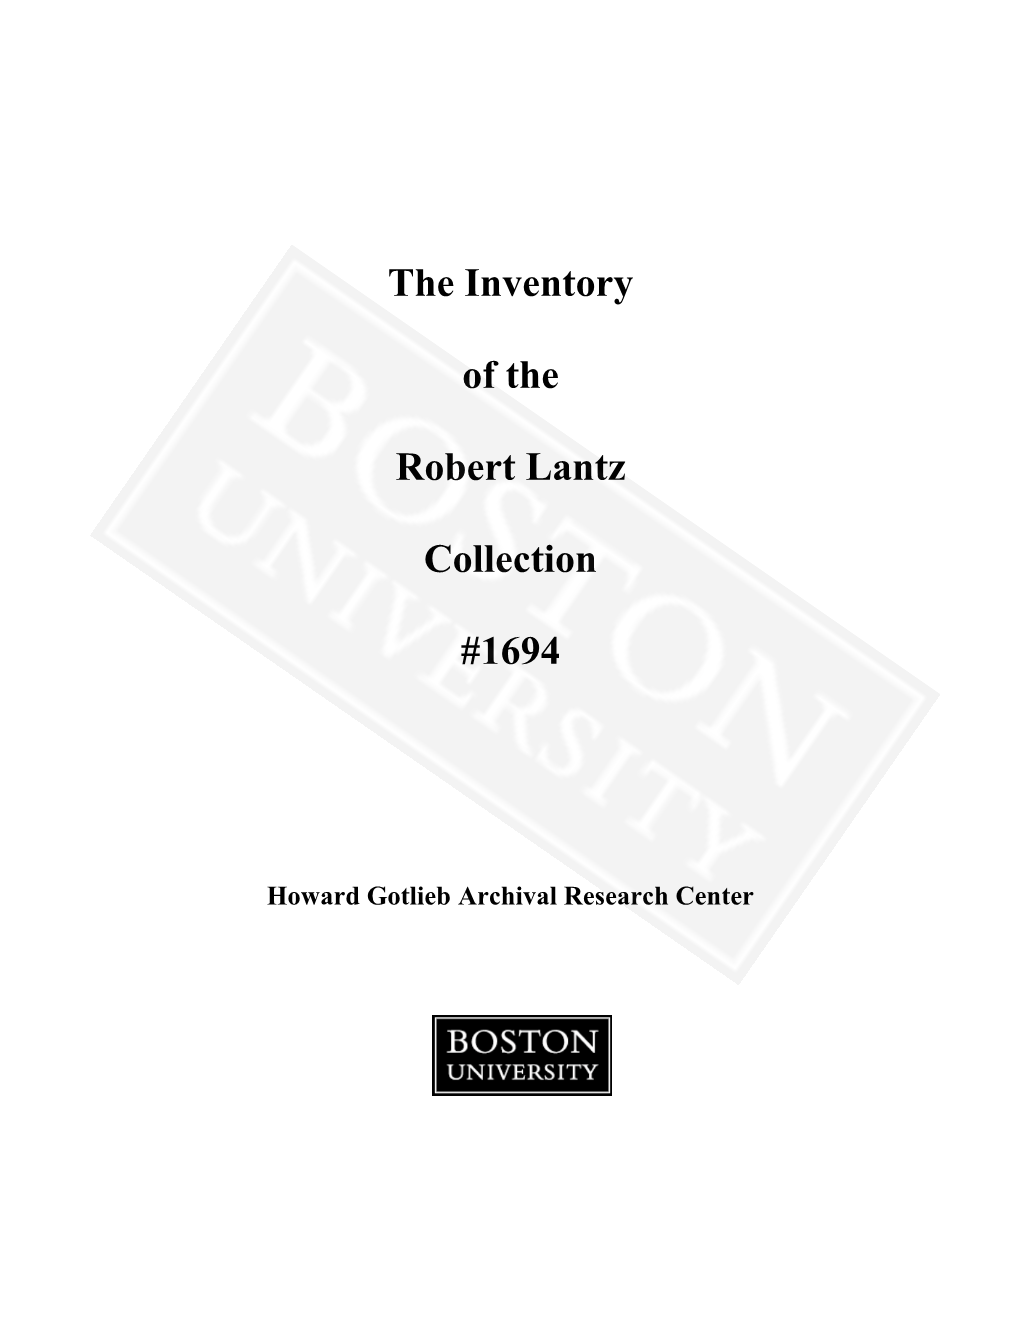 The Inventory of the Robert Lantz Collection #1694